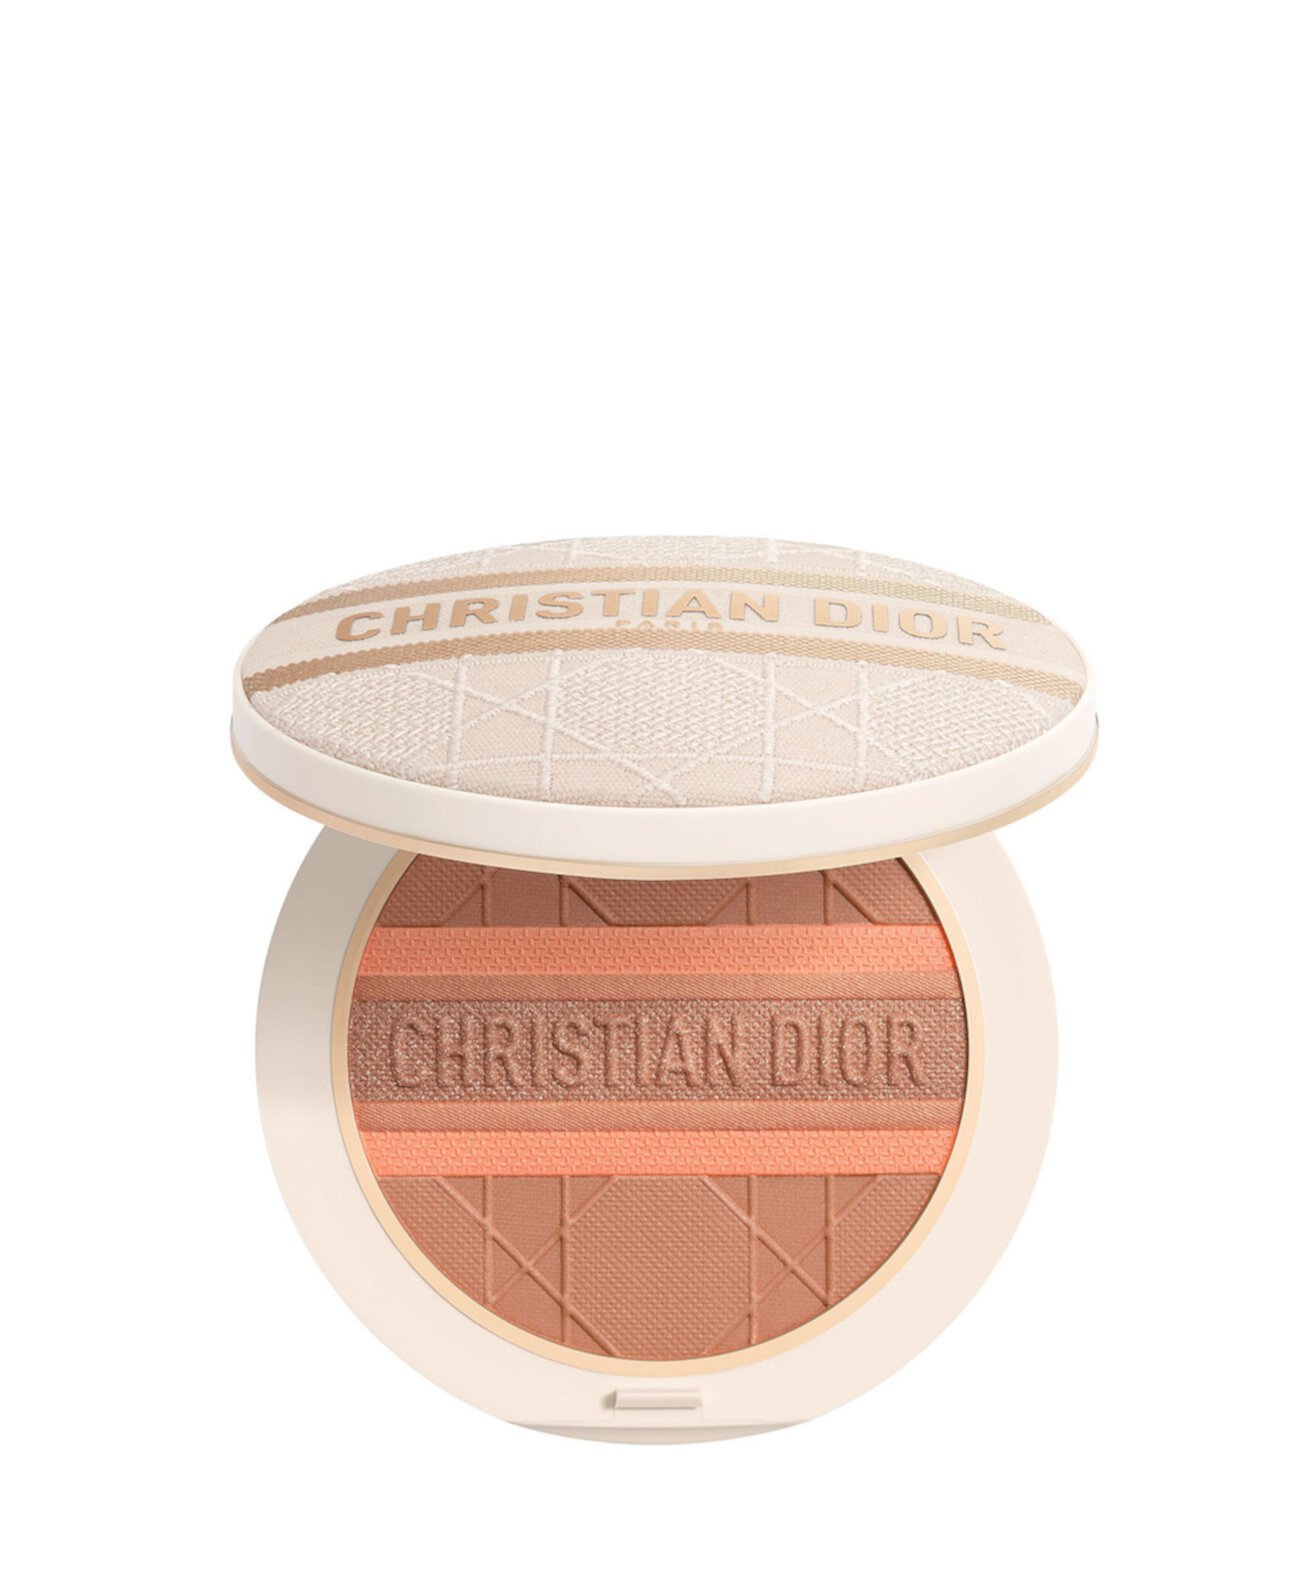 Forever Bronze Glow Sun-Kissed Finish Healthy Glow Powder Dior